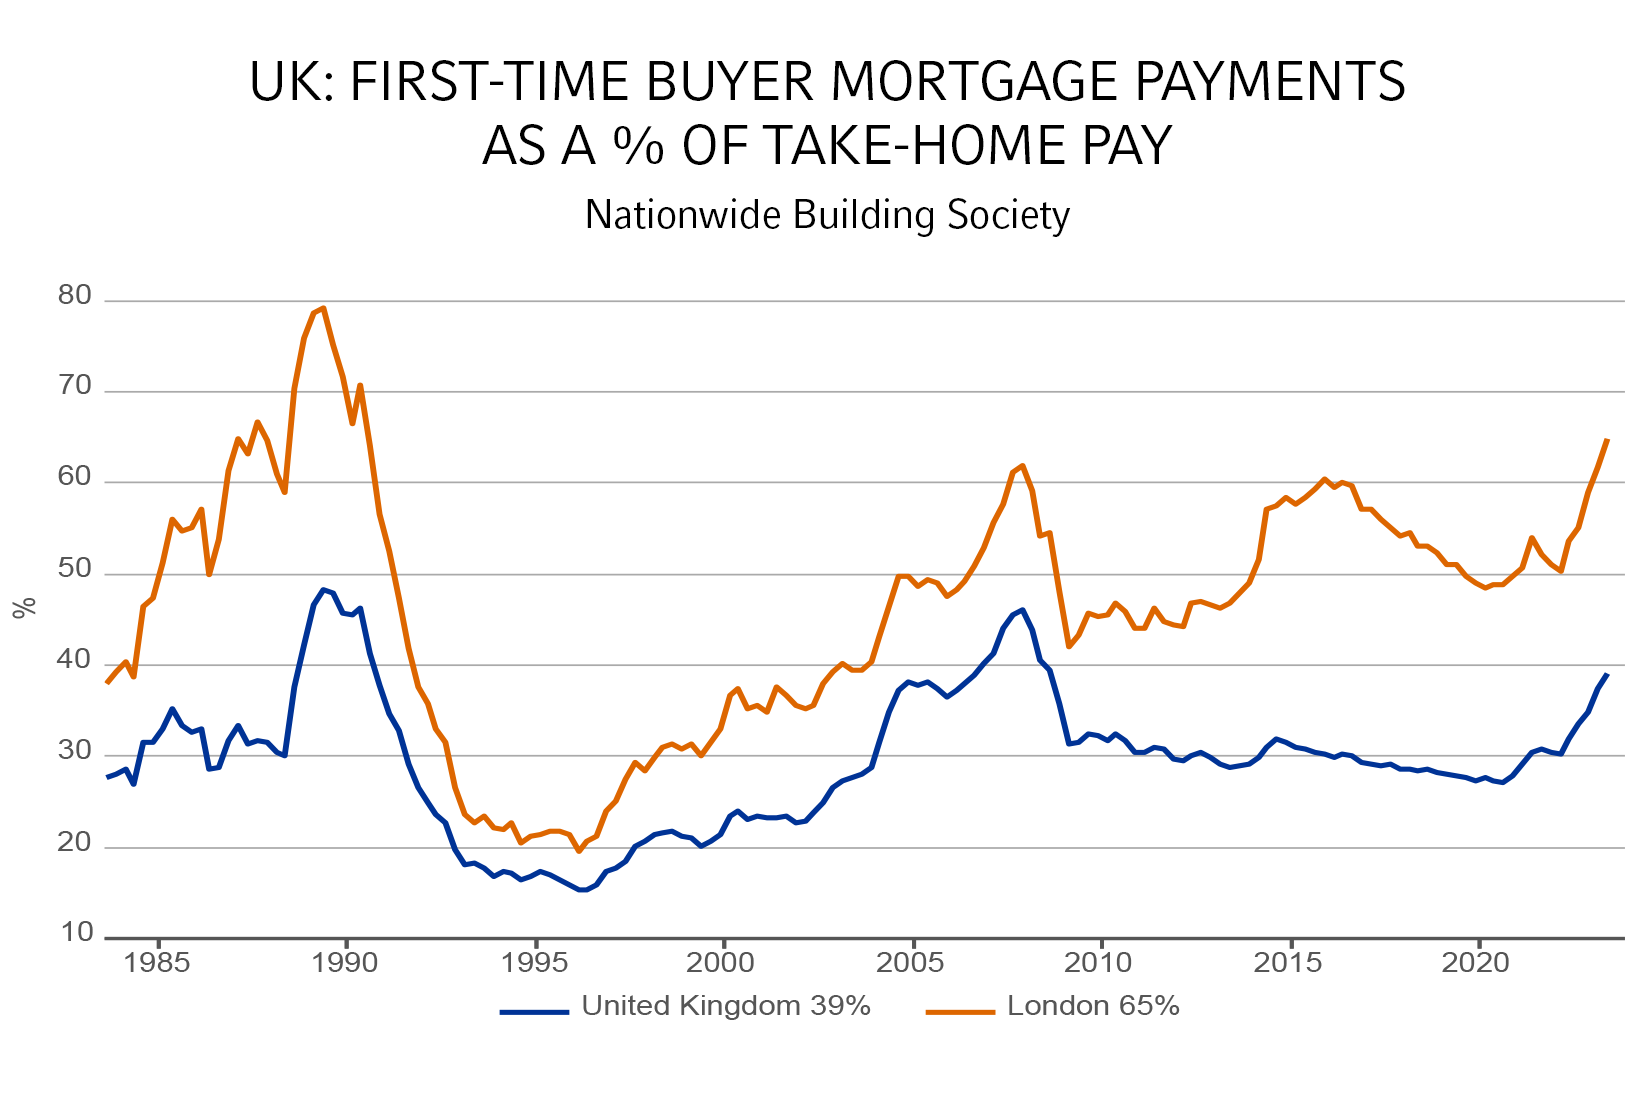 Line chart showing UK first-time buyer mortgage payments as a % of their take-home pay